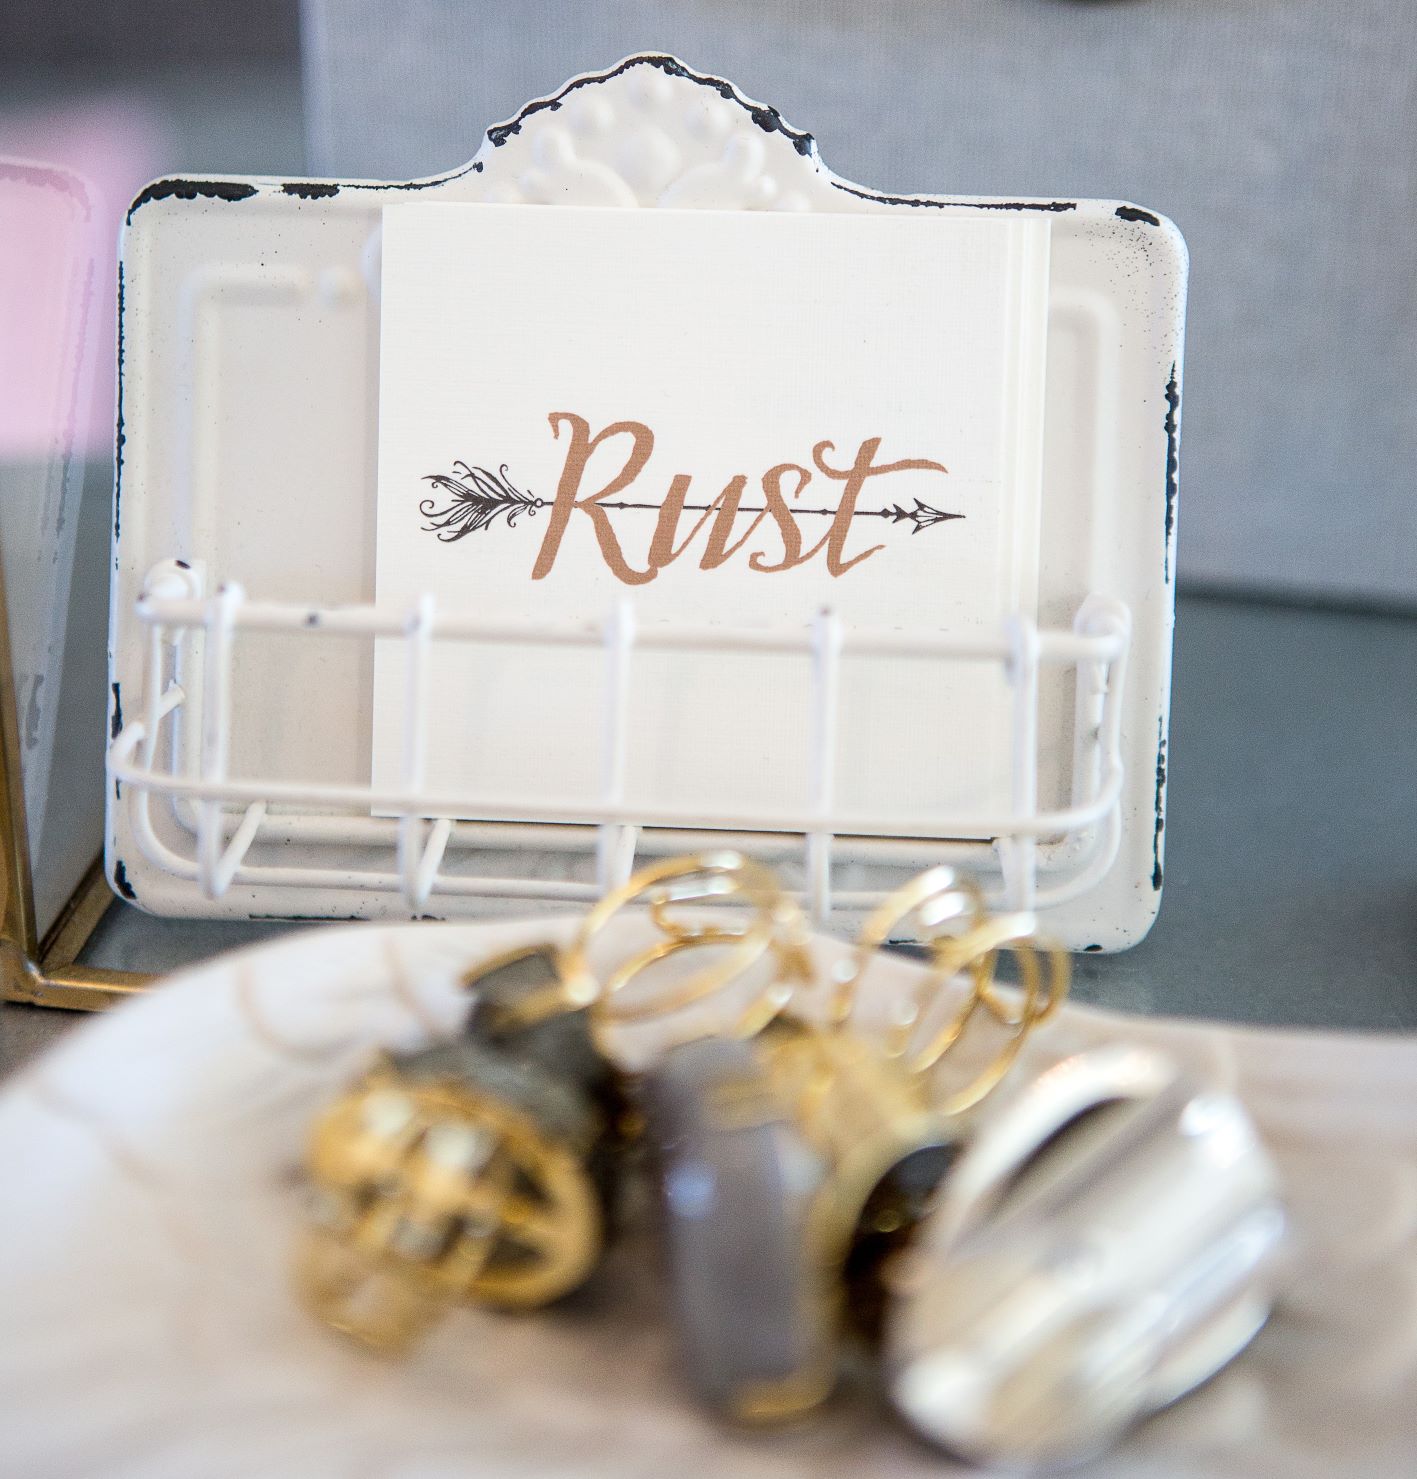 Rust Boutique business card & jewelry